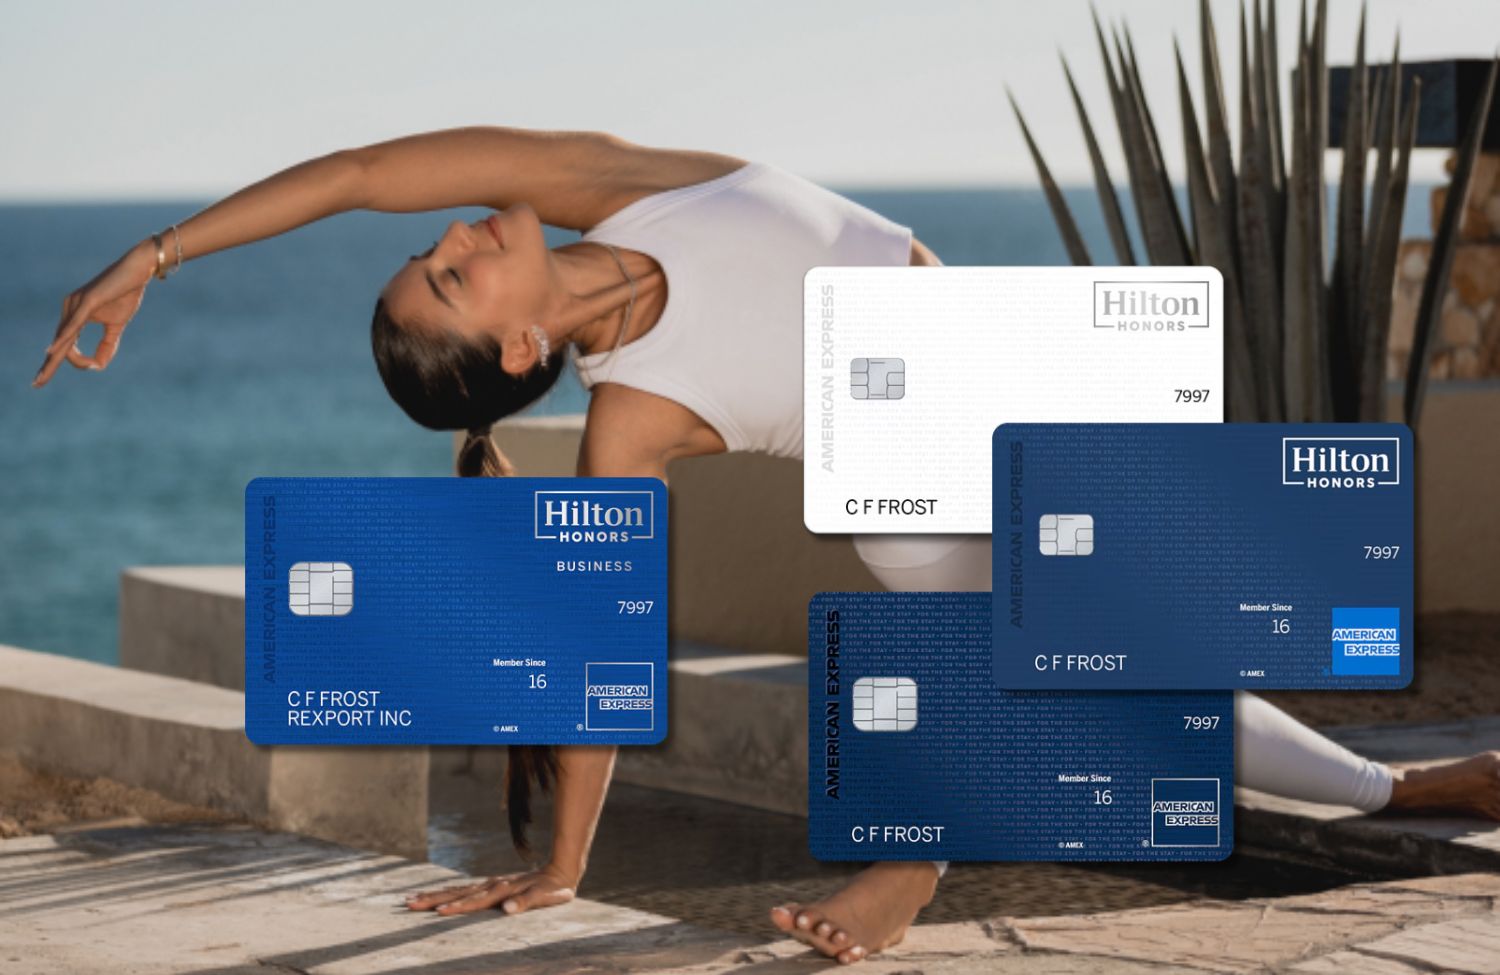 Hilton Honors Amex Cards